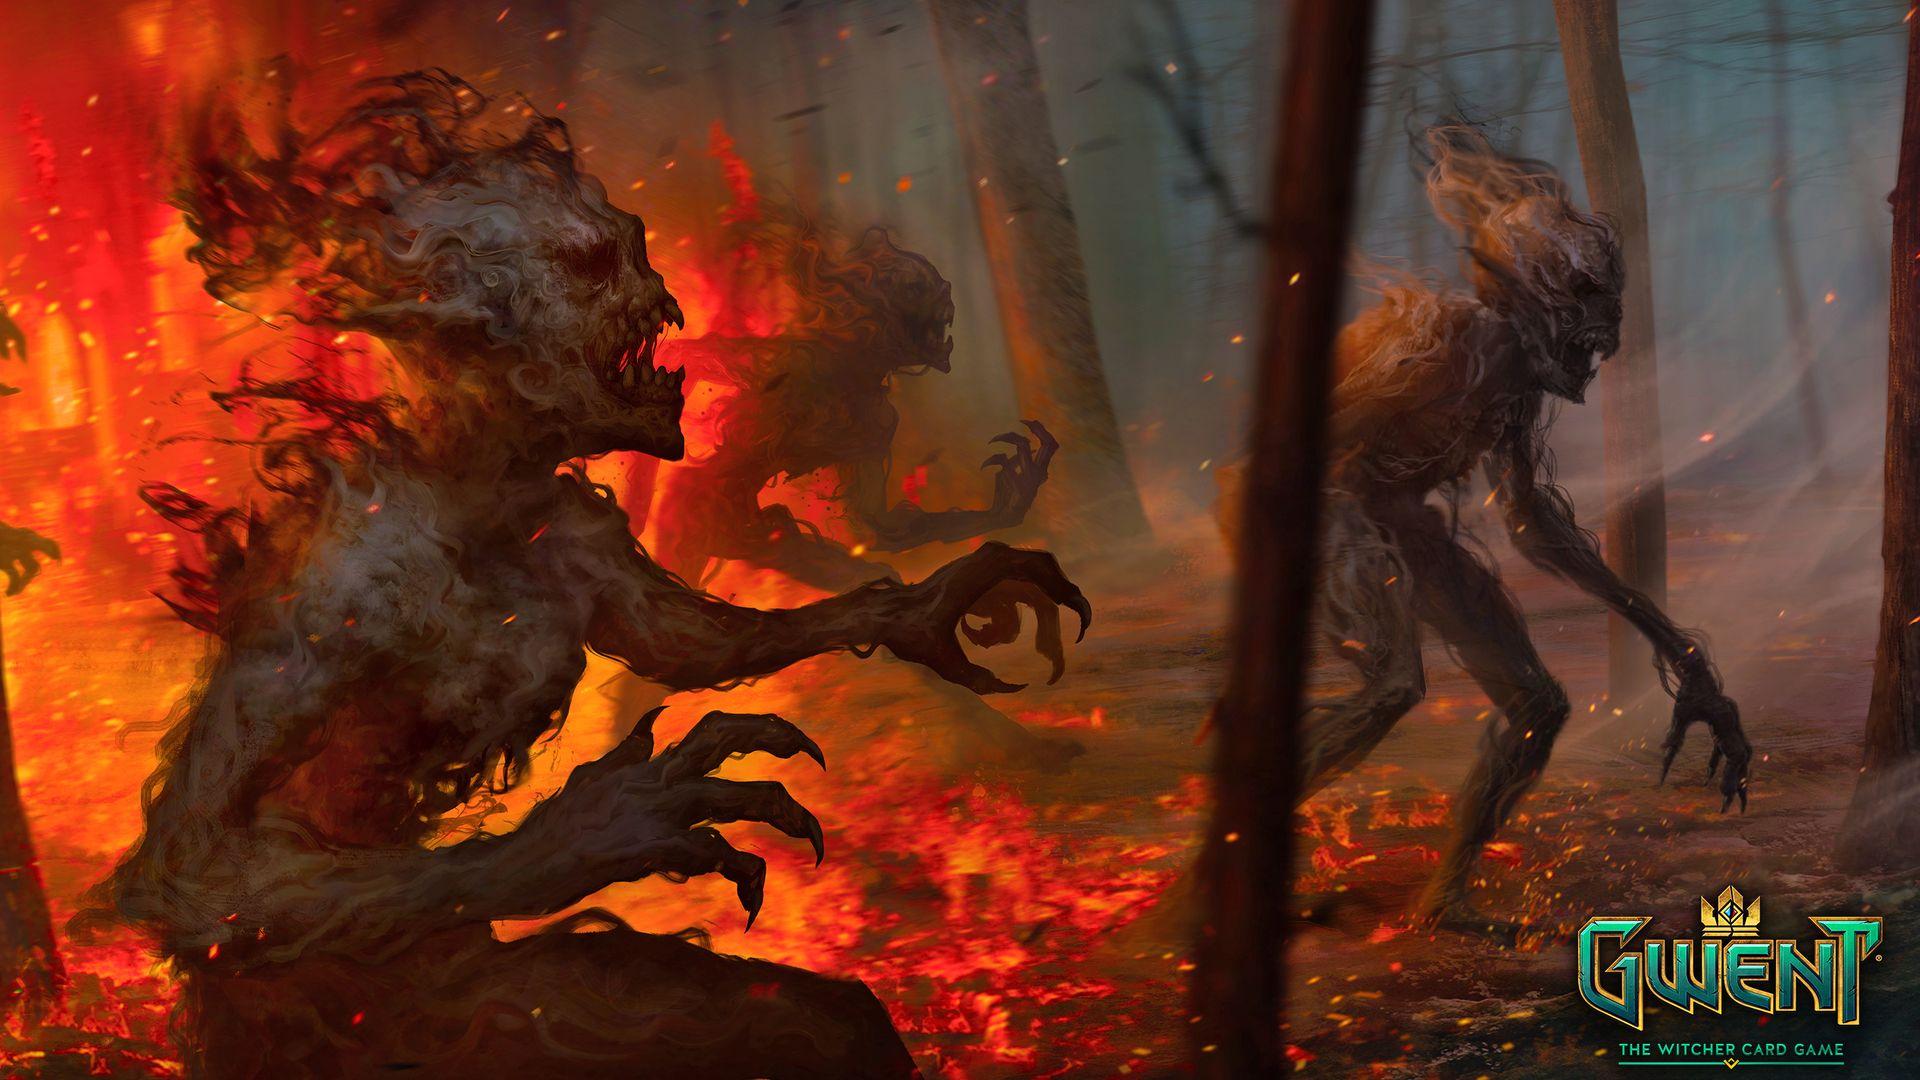 Burning monsters in the woods Wallpaper from Gwent: The Witcher Card